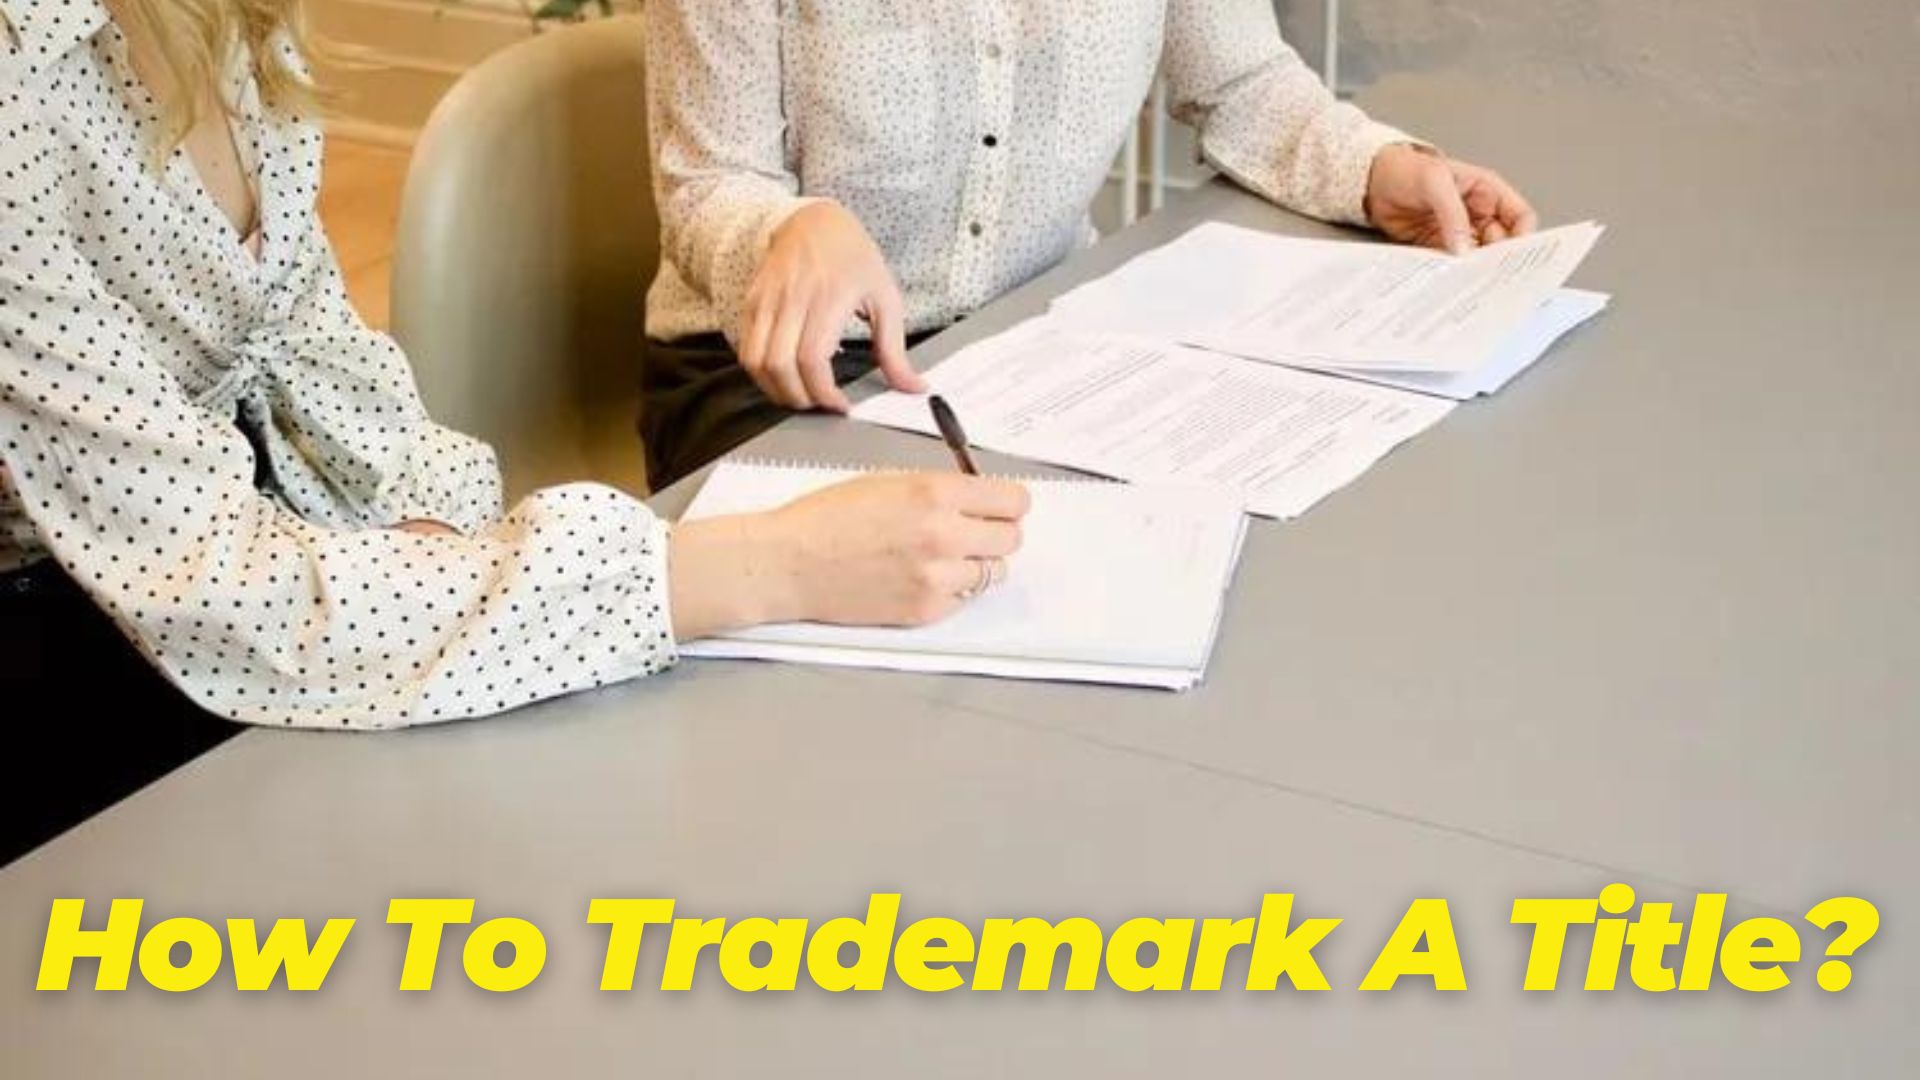 How To Trademark A Title?